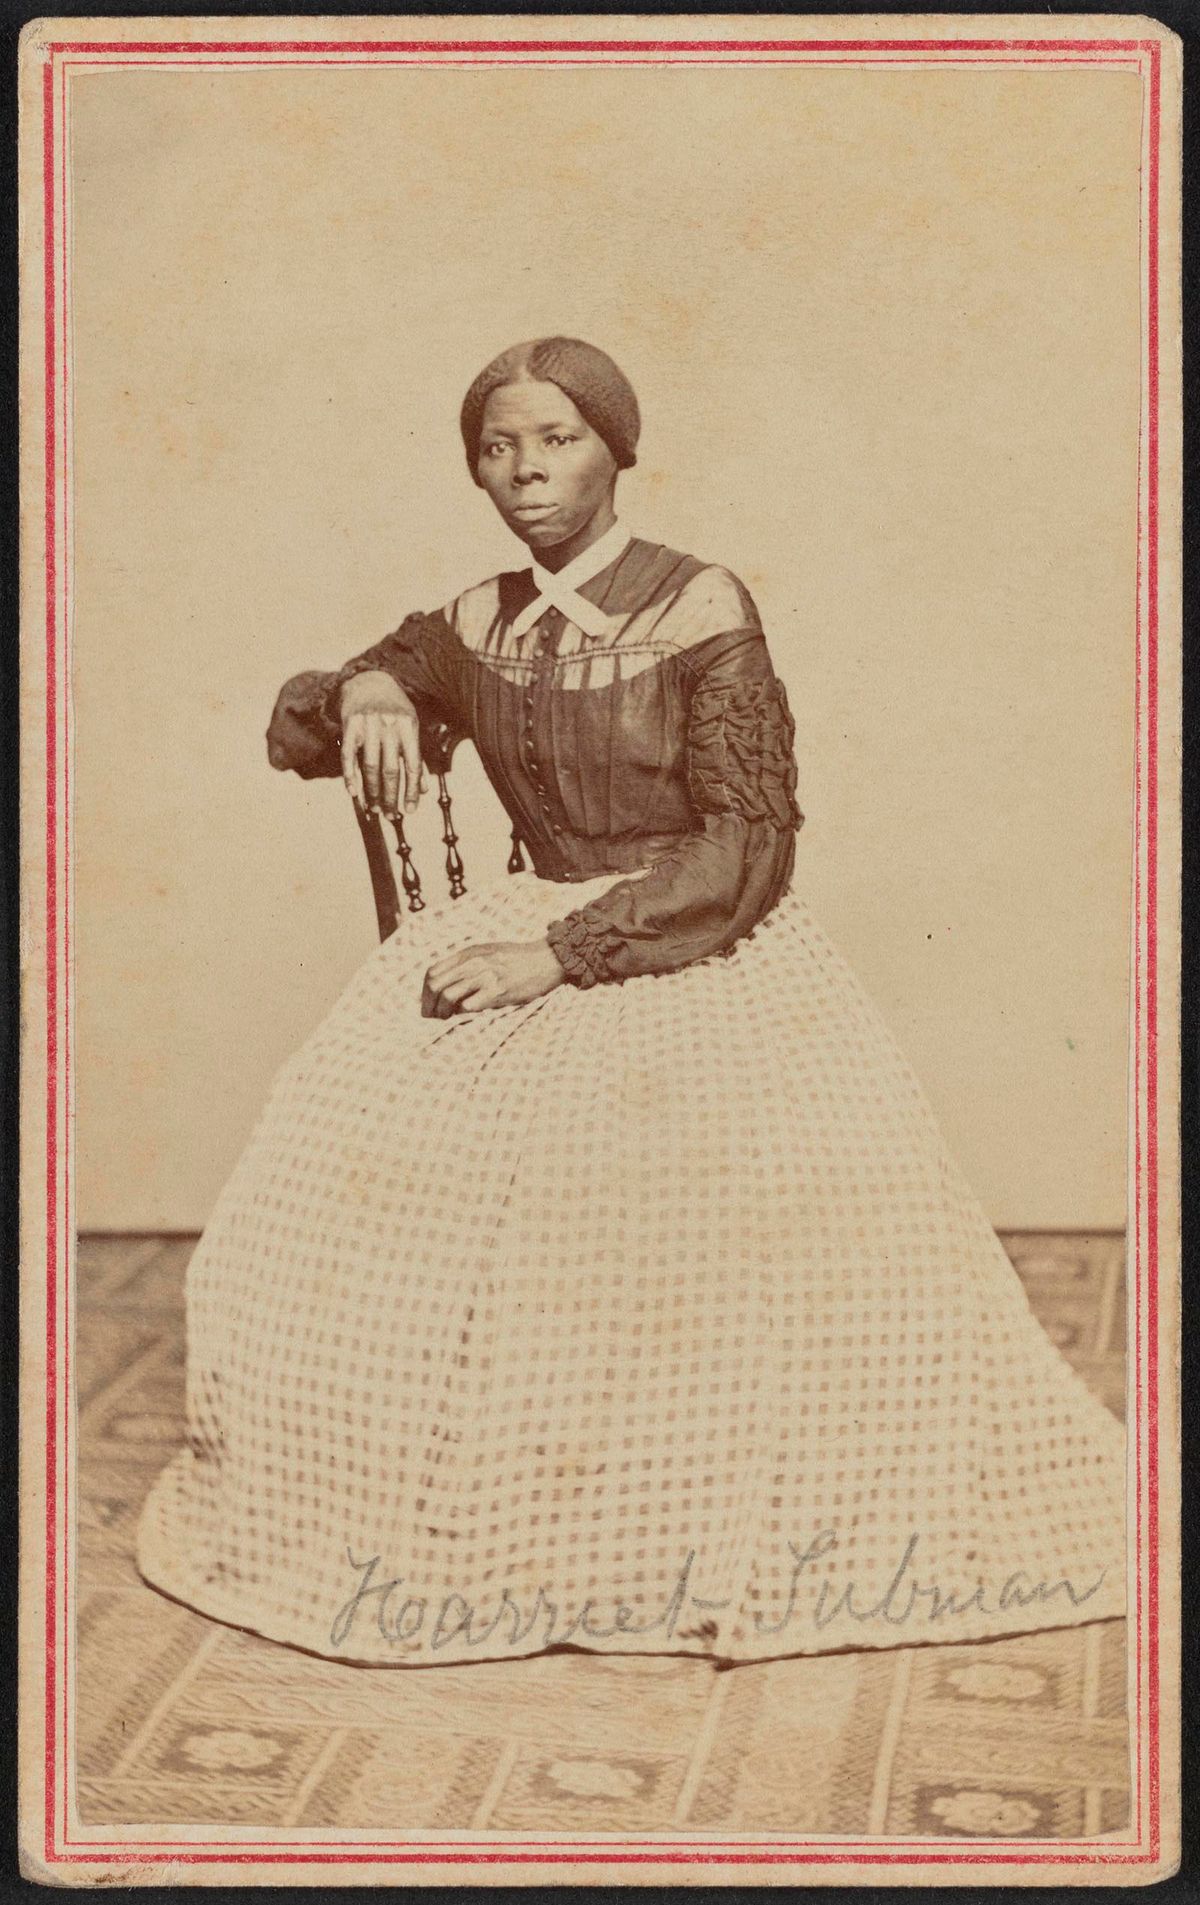 Harriet Tubman in a rediscovered carte de visite photograph (around 1868-69) Collection of the Smithsonian National Museum of African American History and Culture shared with the Library of Congress